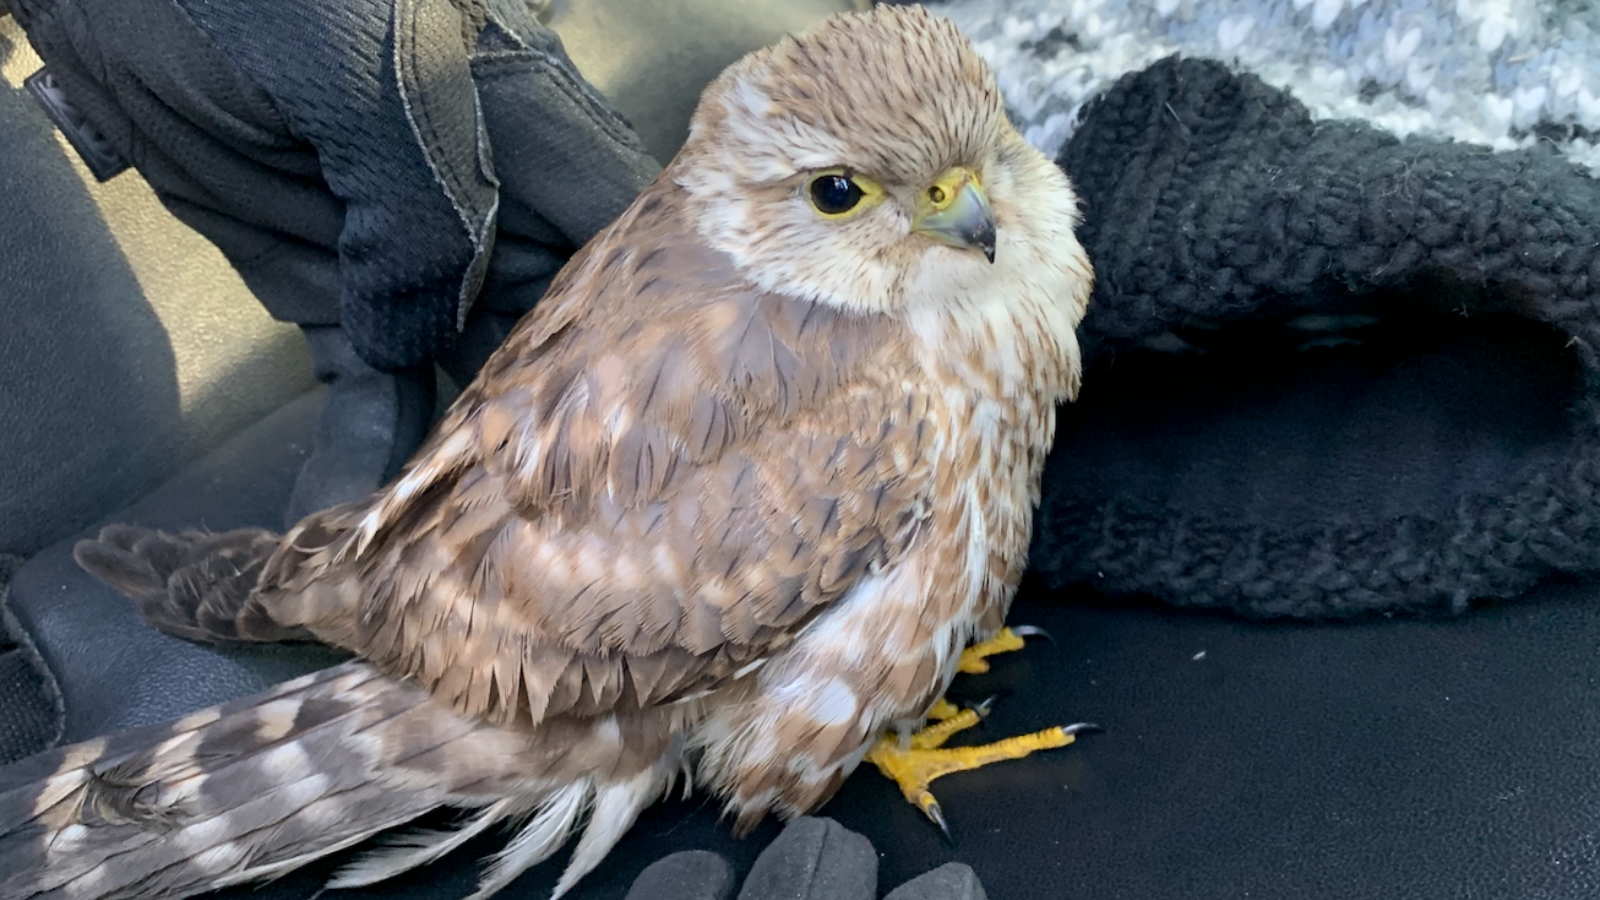 A Salt Lake City Police officer helped rescue an injured bird, later determined to be some type of ...